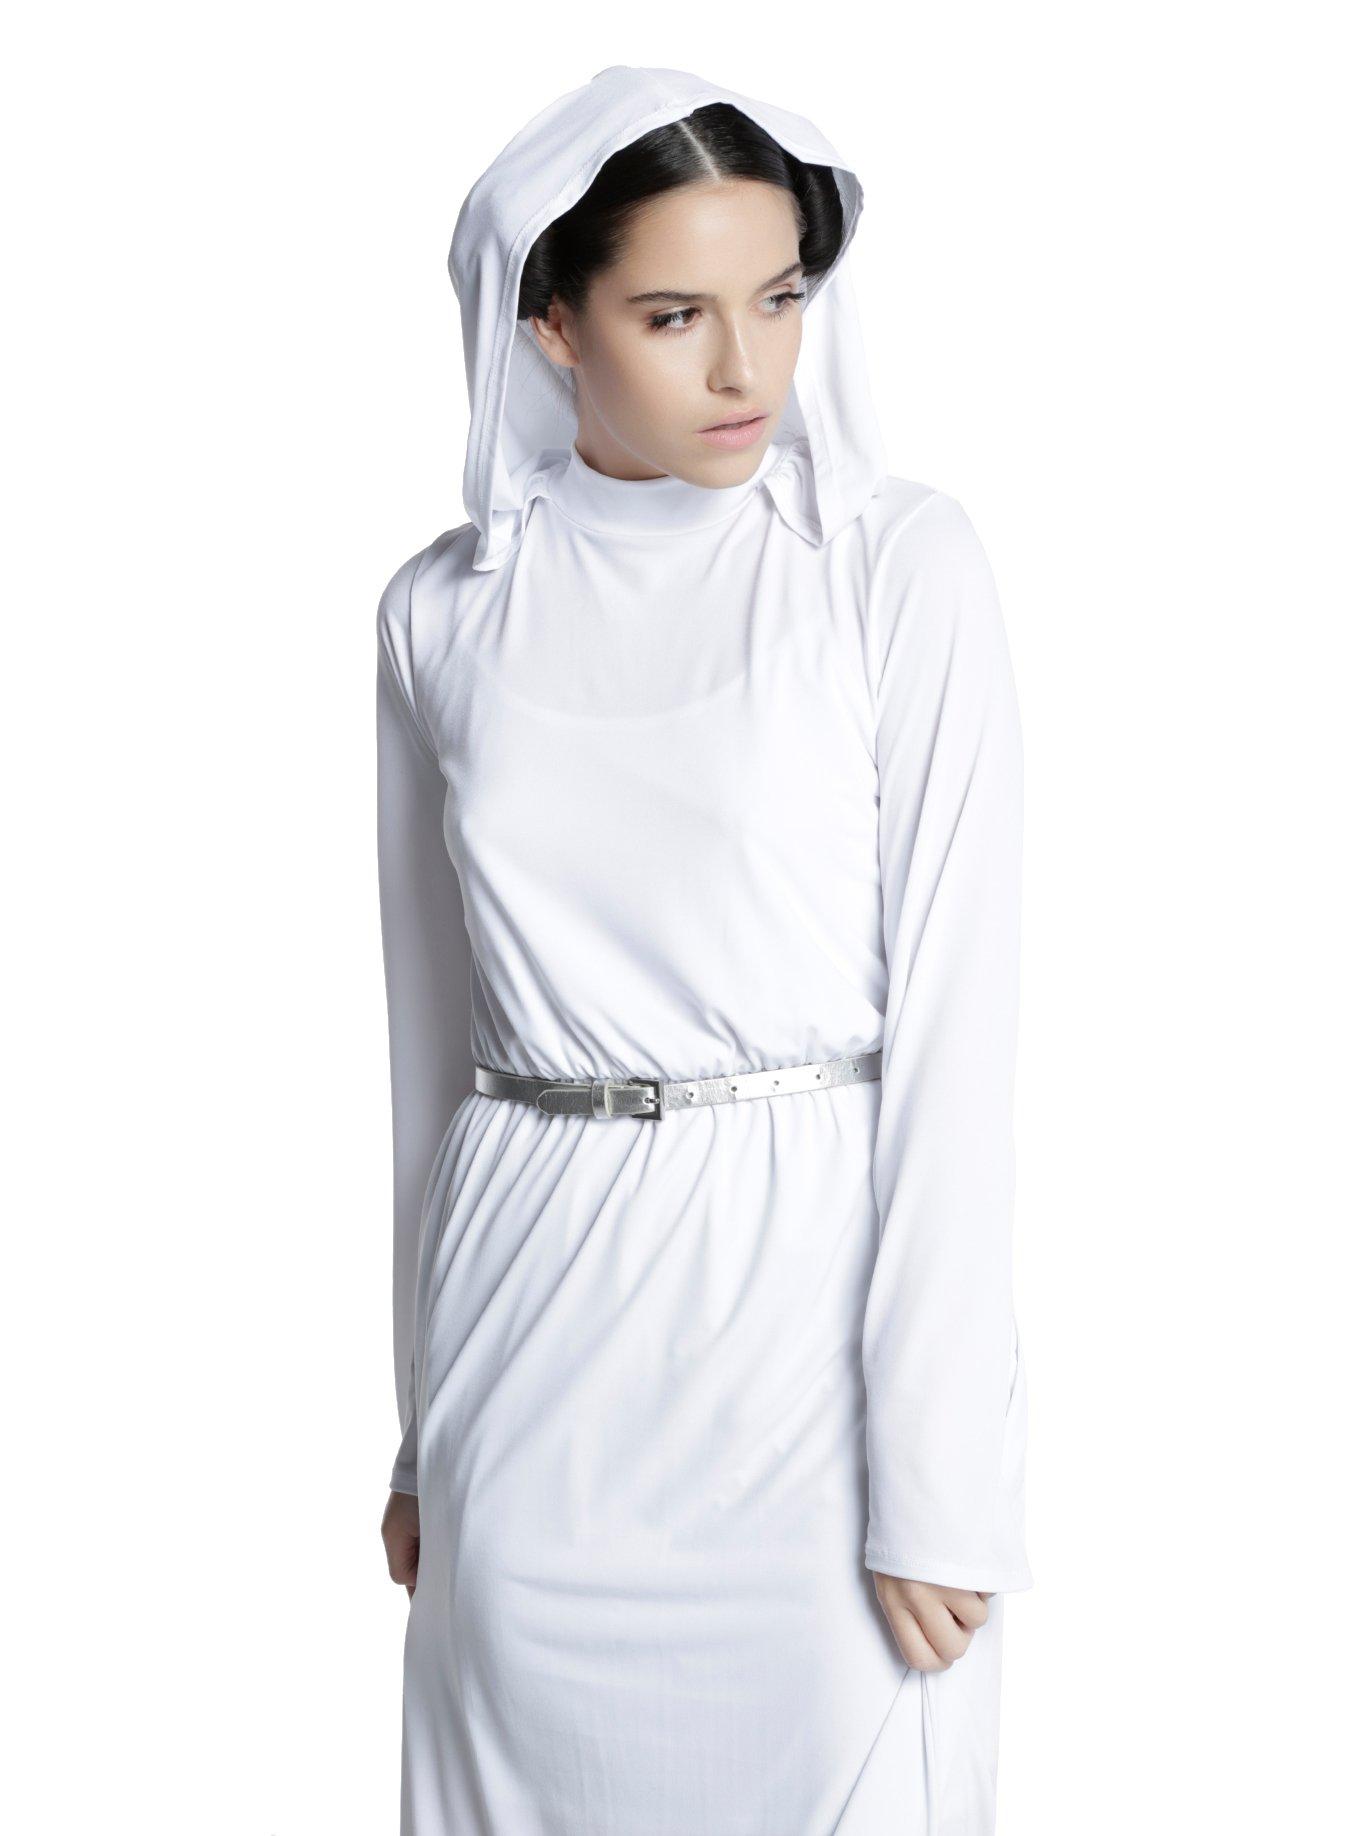 Her Universe Star Wars Princess Leia White Cosplay Gown, WHITE, hi-res